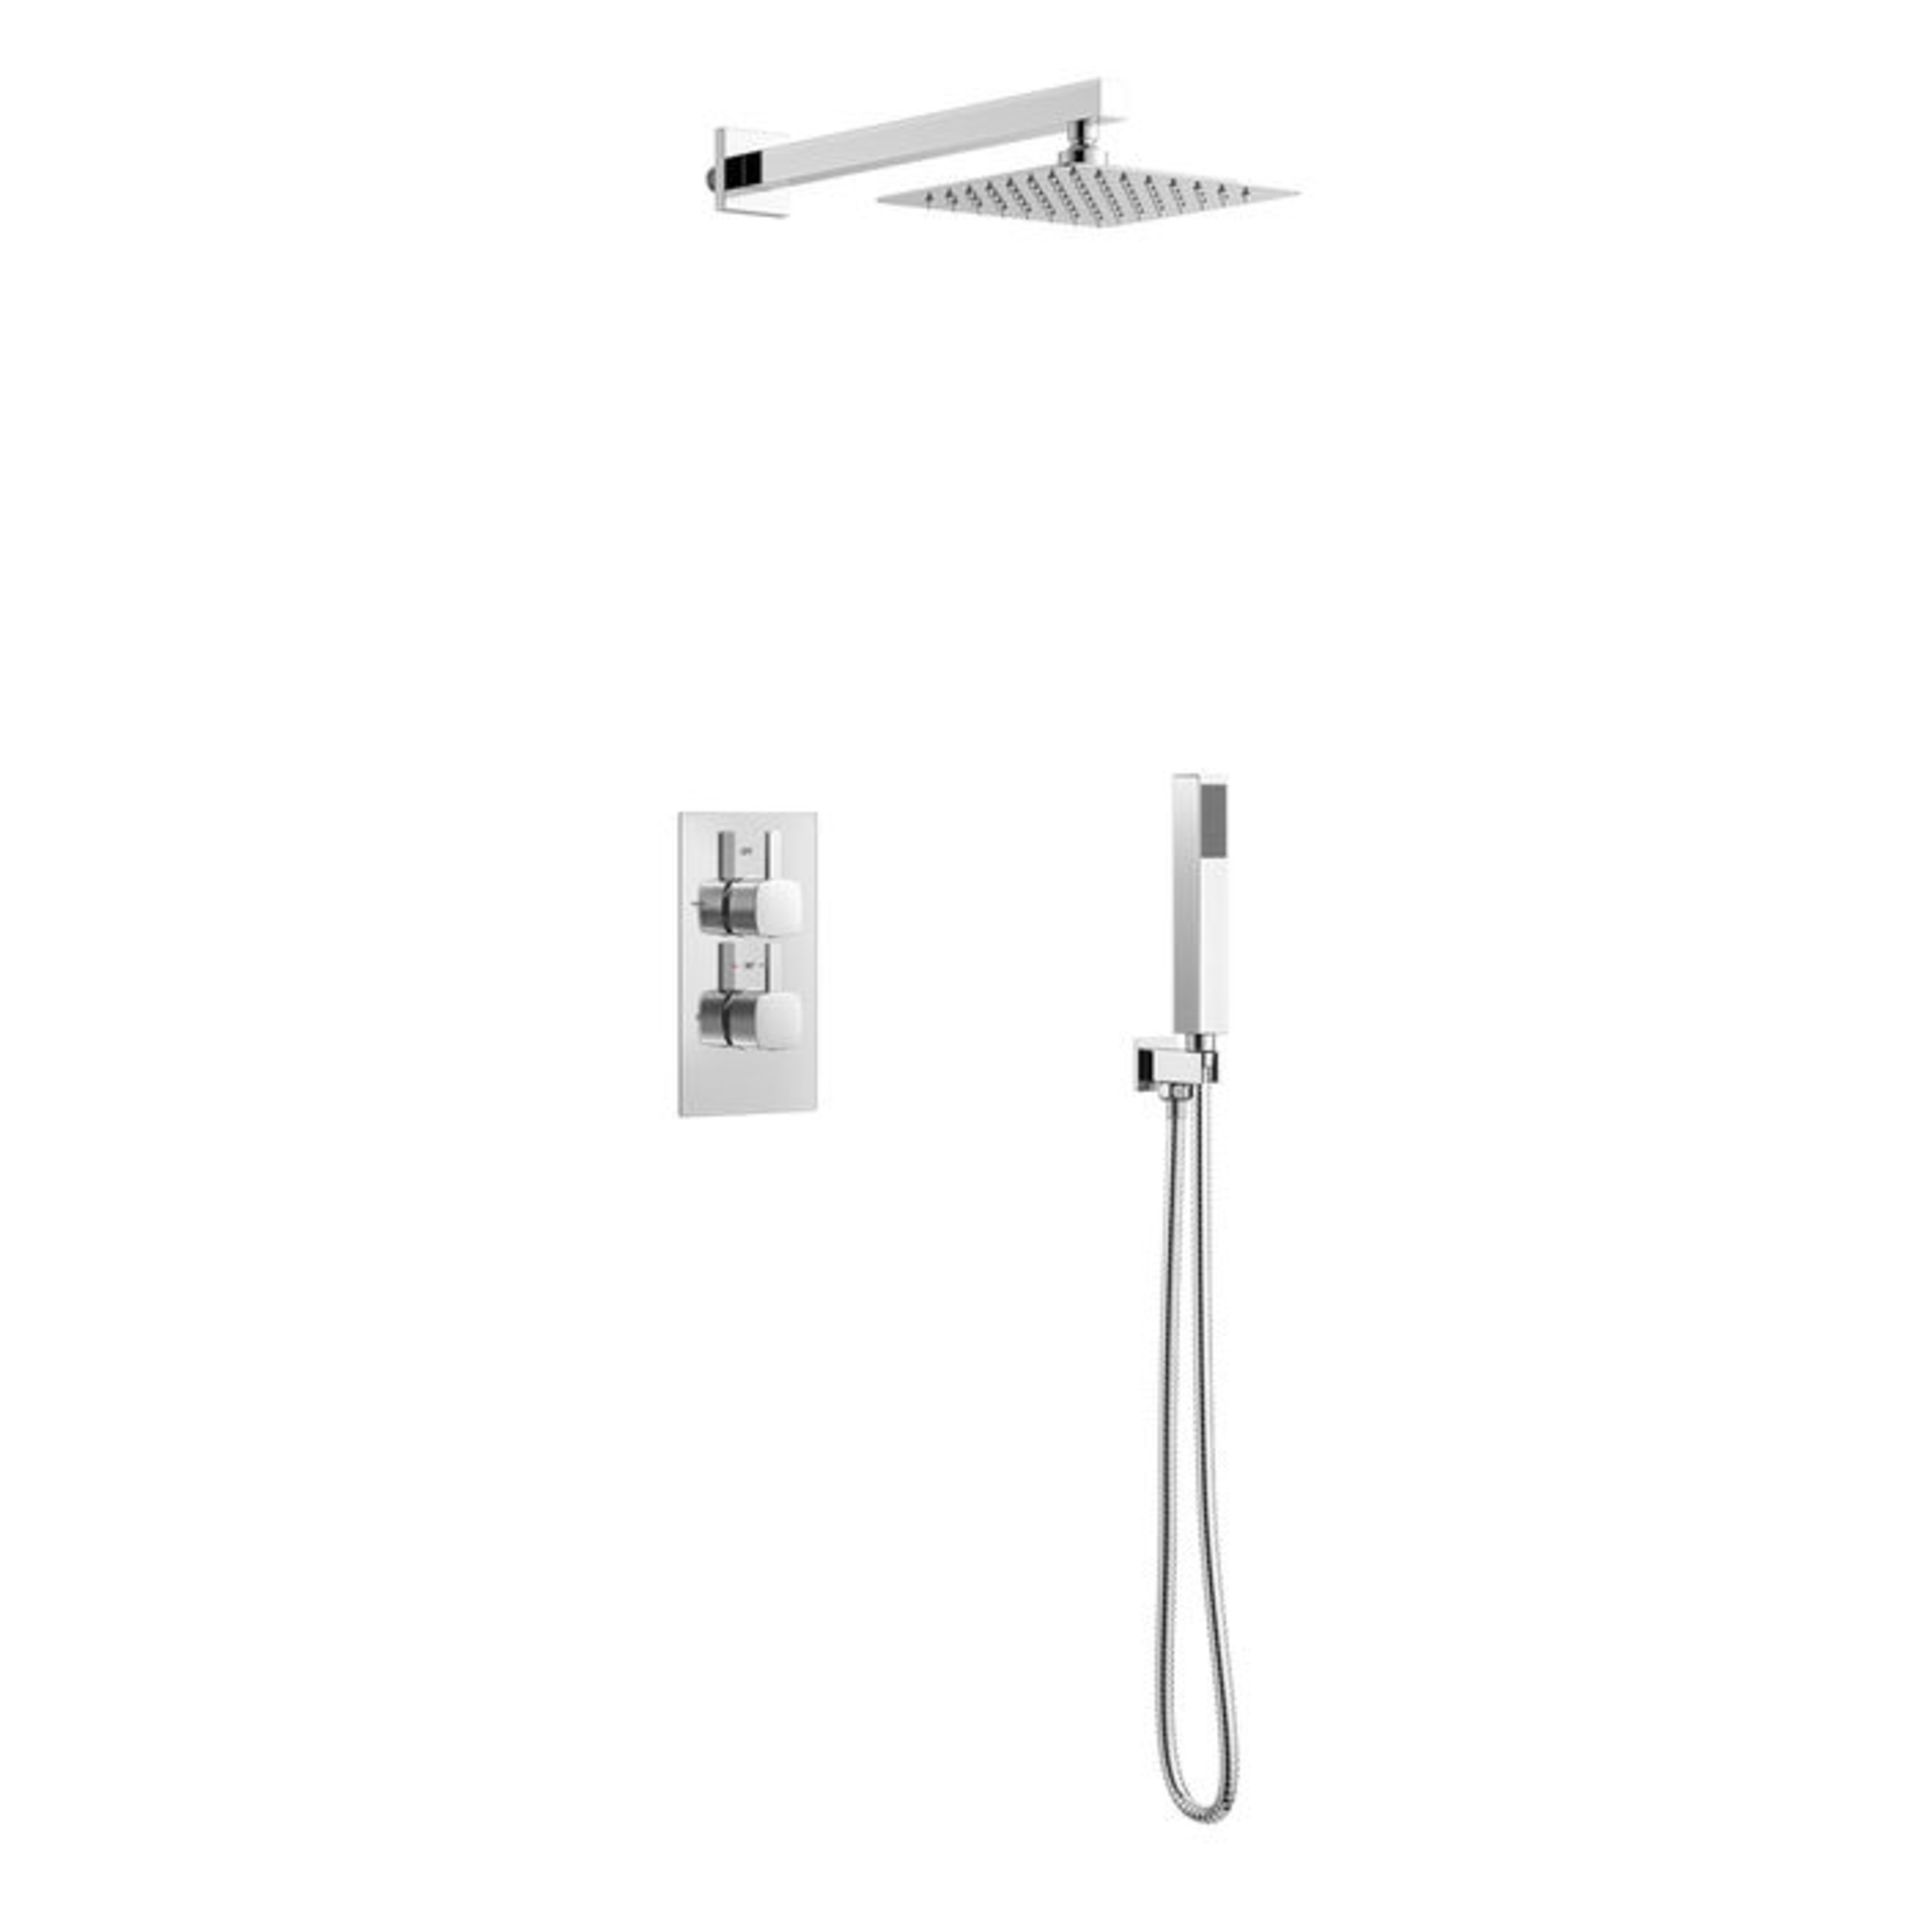 (PA78) Square Concealed Thermostatic Mixer Shower Kit & Medium Head. Family friendly detachable hand - Image 3 of 4